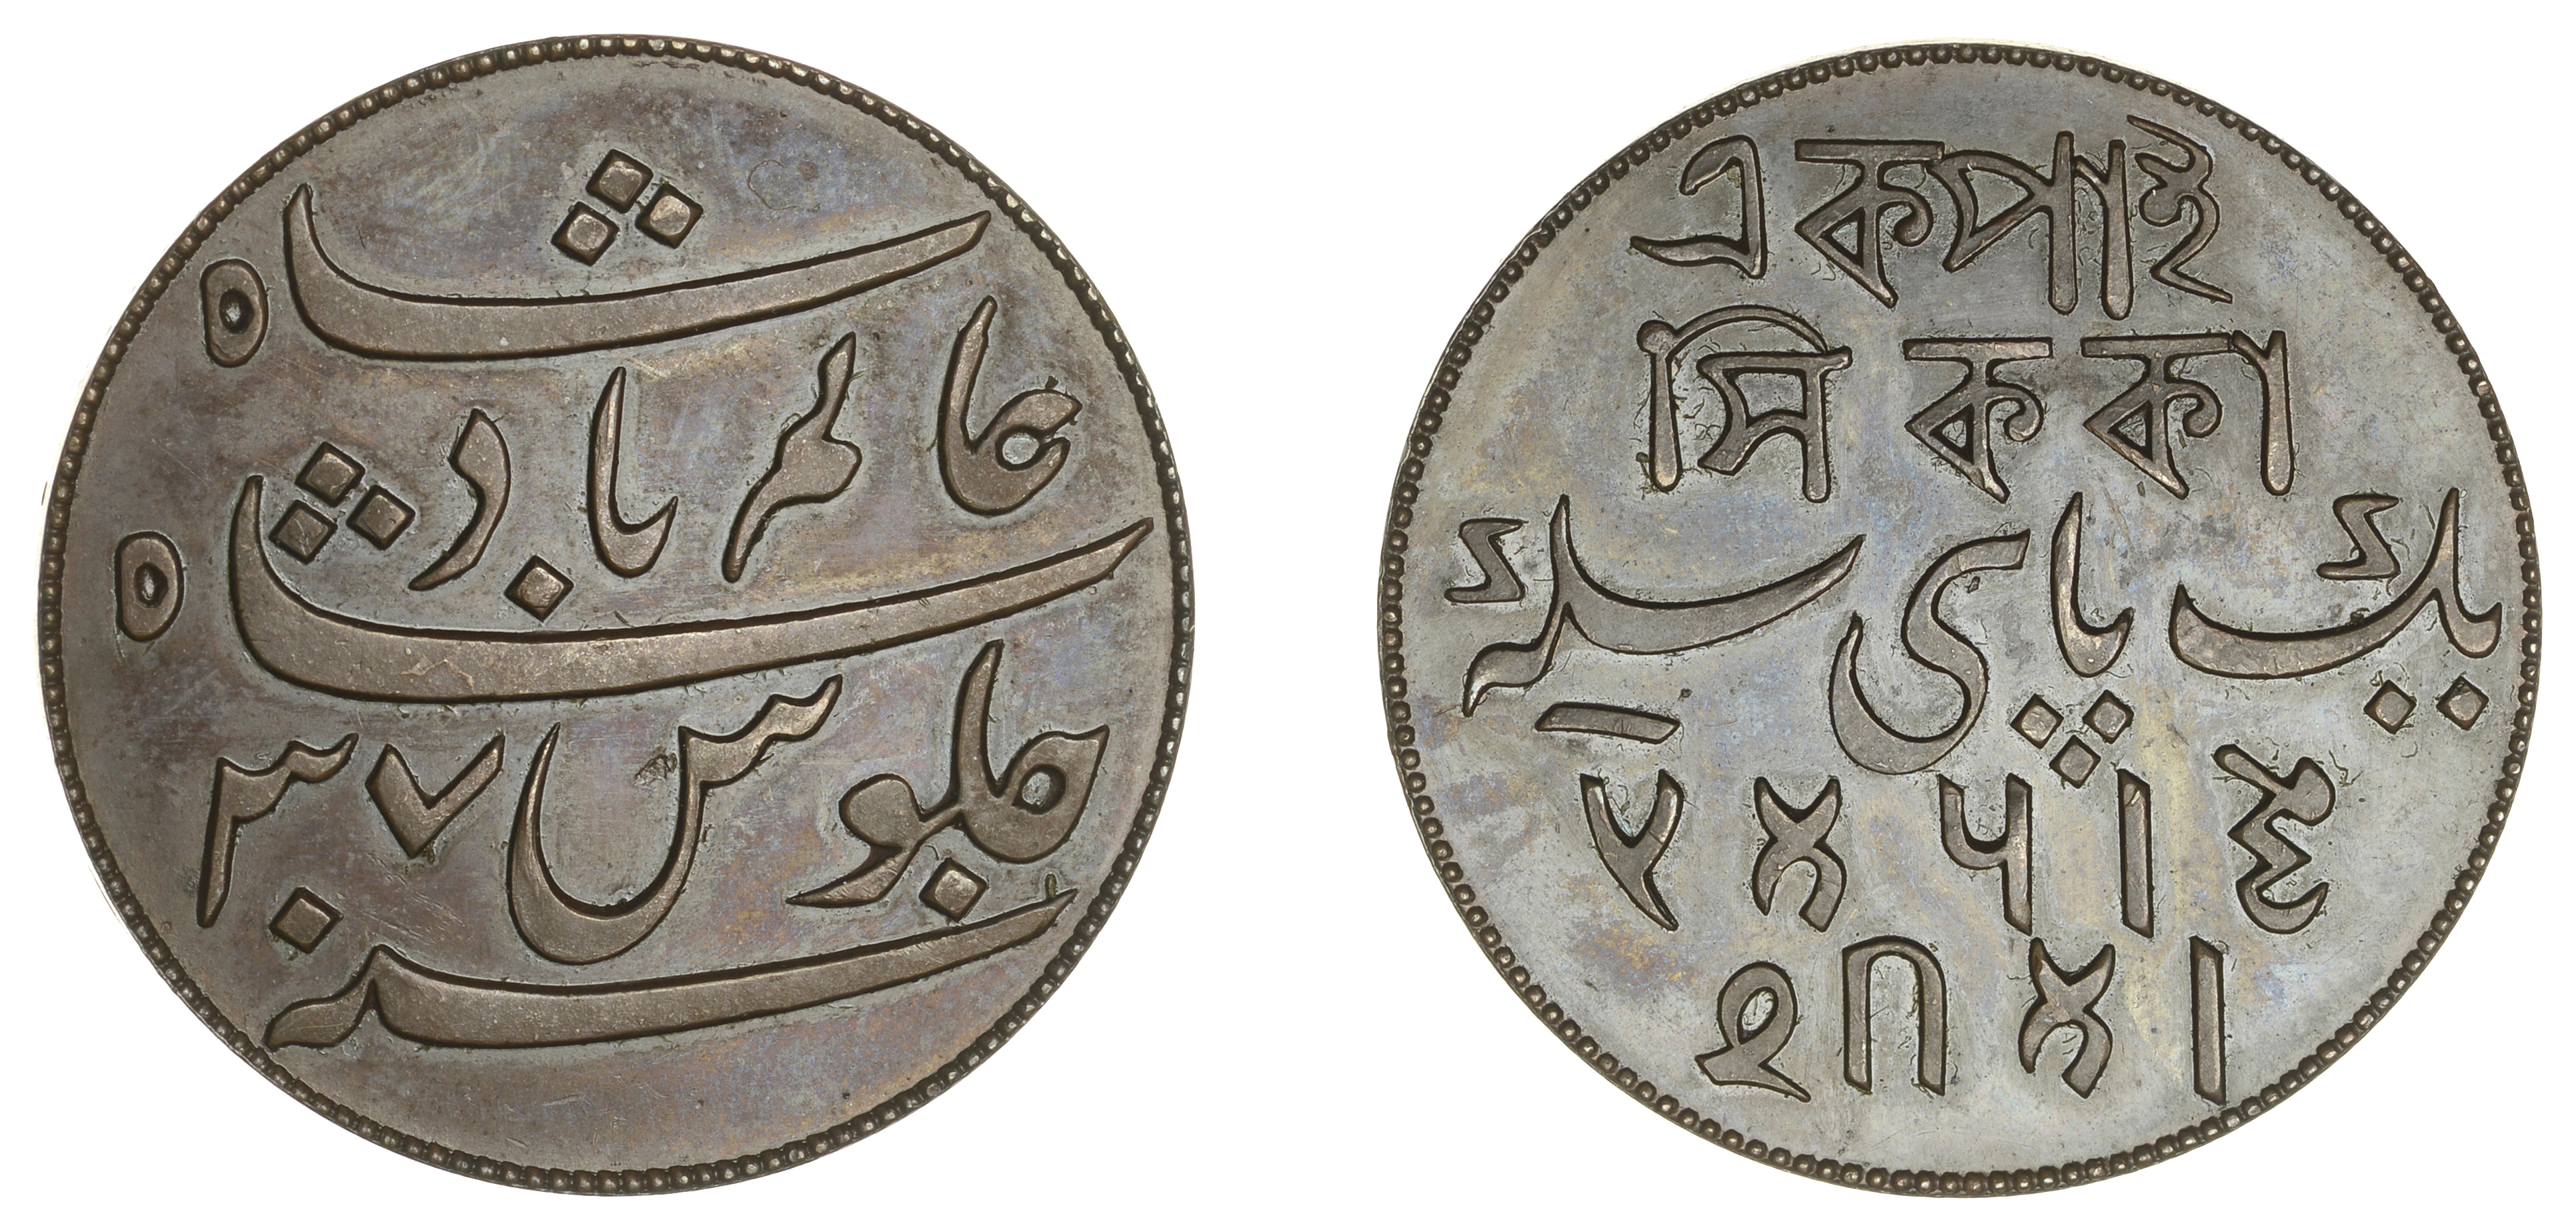 East India Company, Bengal Presidency, European Minting, Soho, bronzed-copper Pattern Proof...